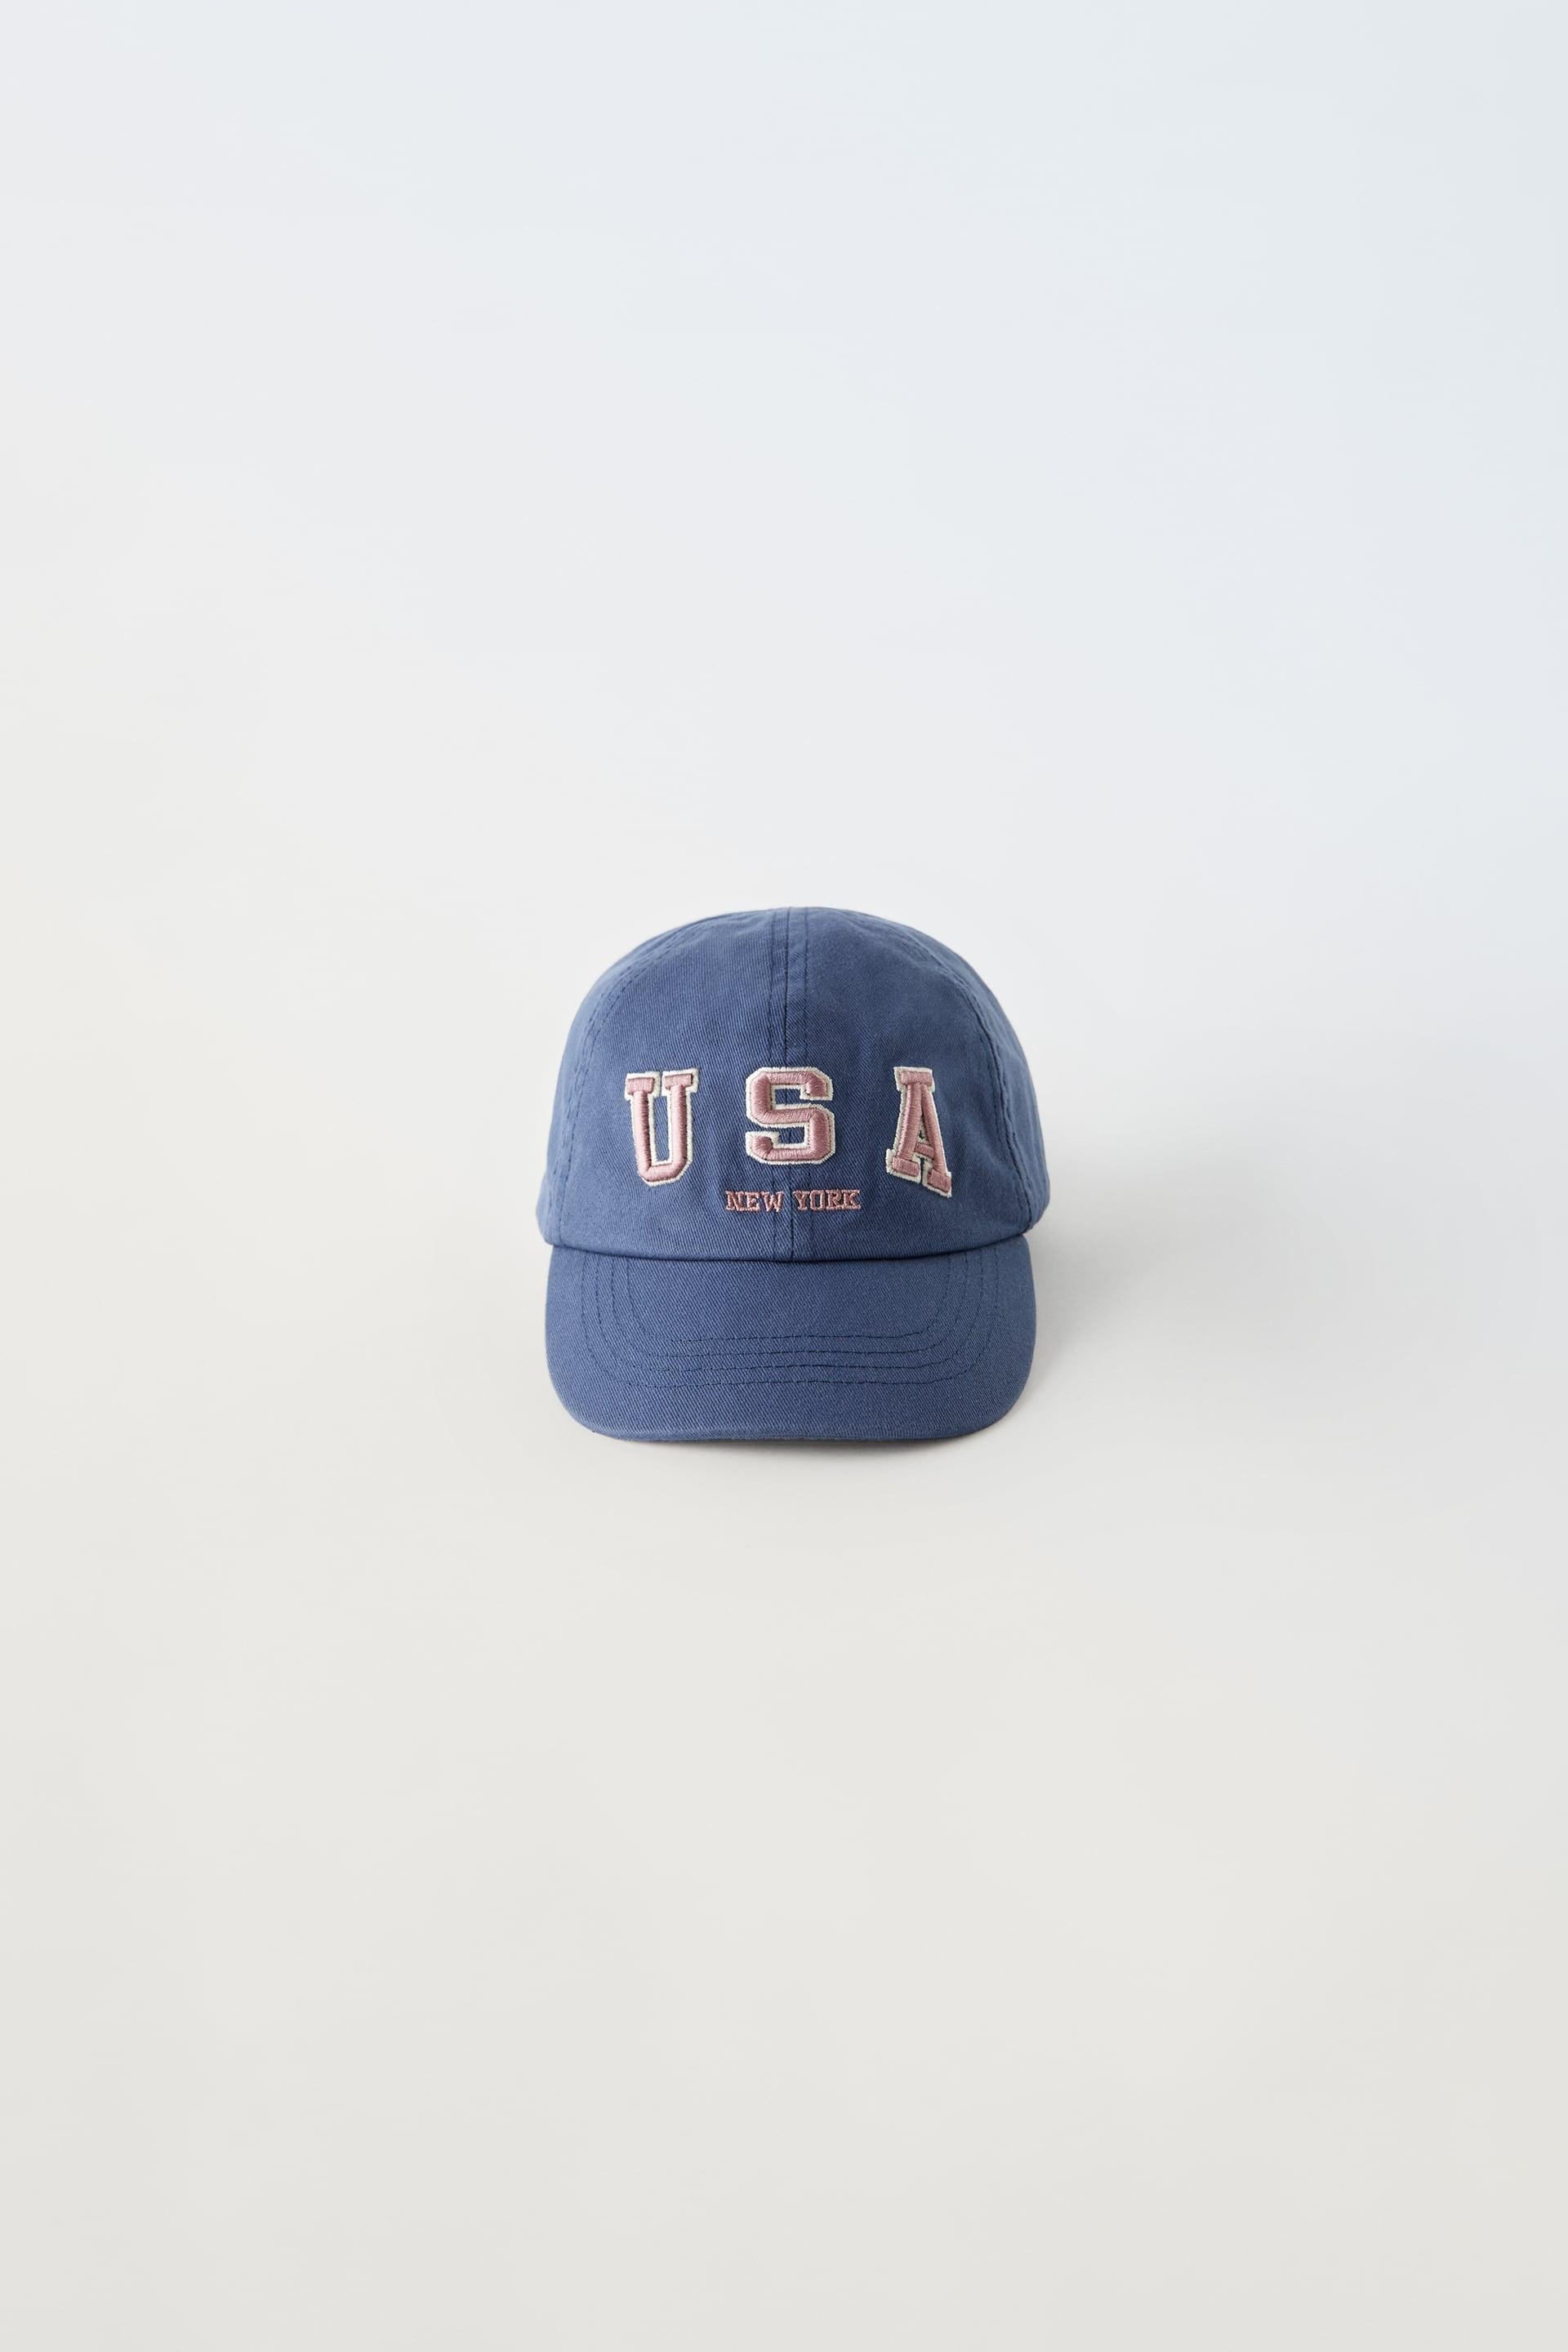 “USA” EMBROIDERED CAP by ZARA